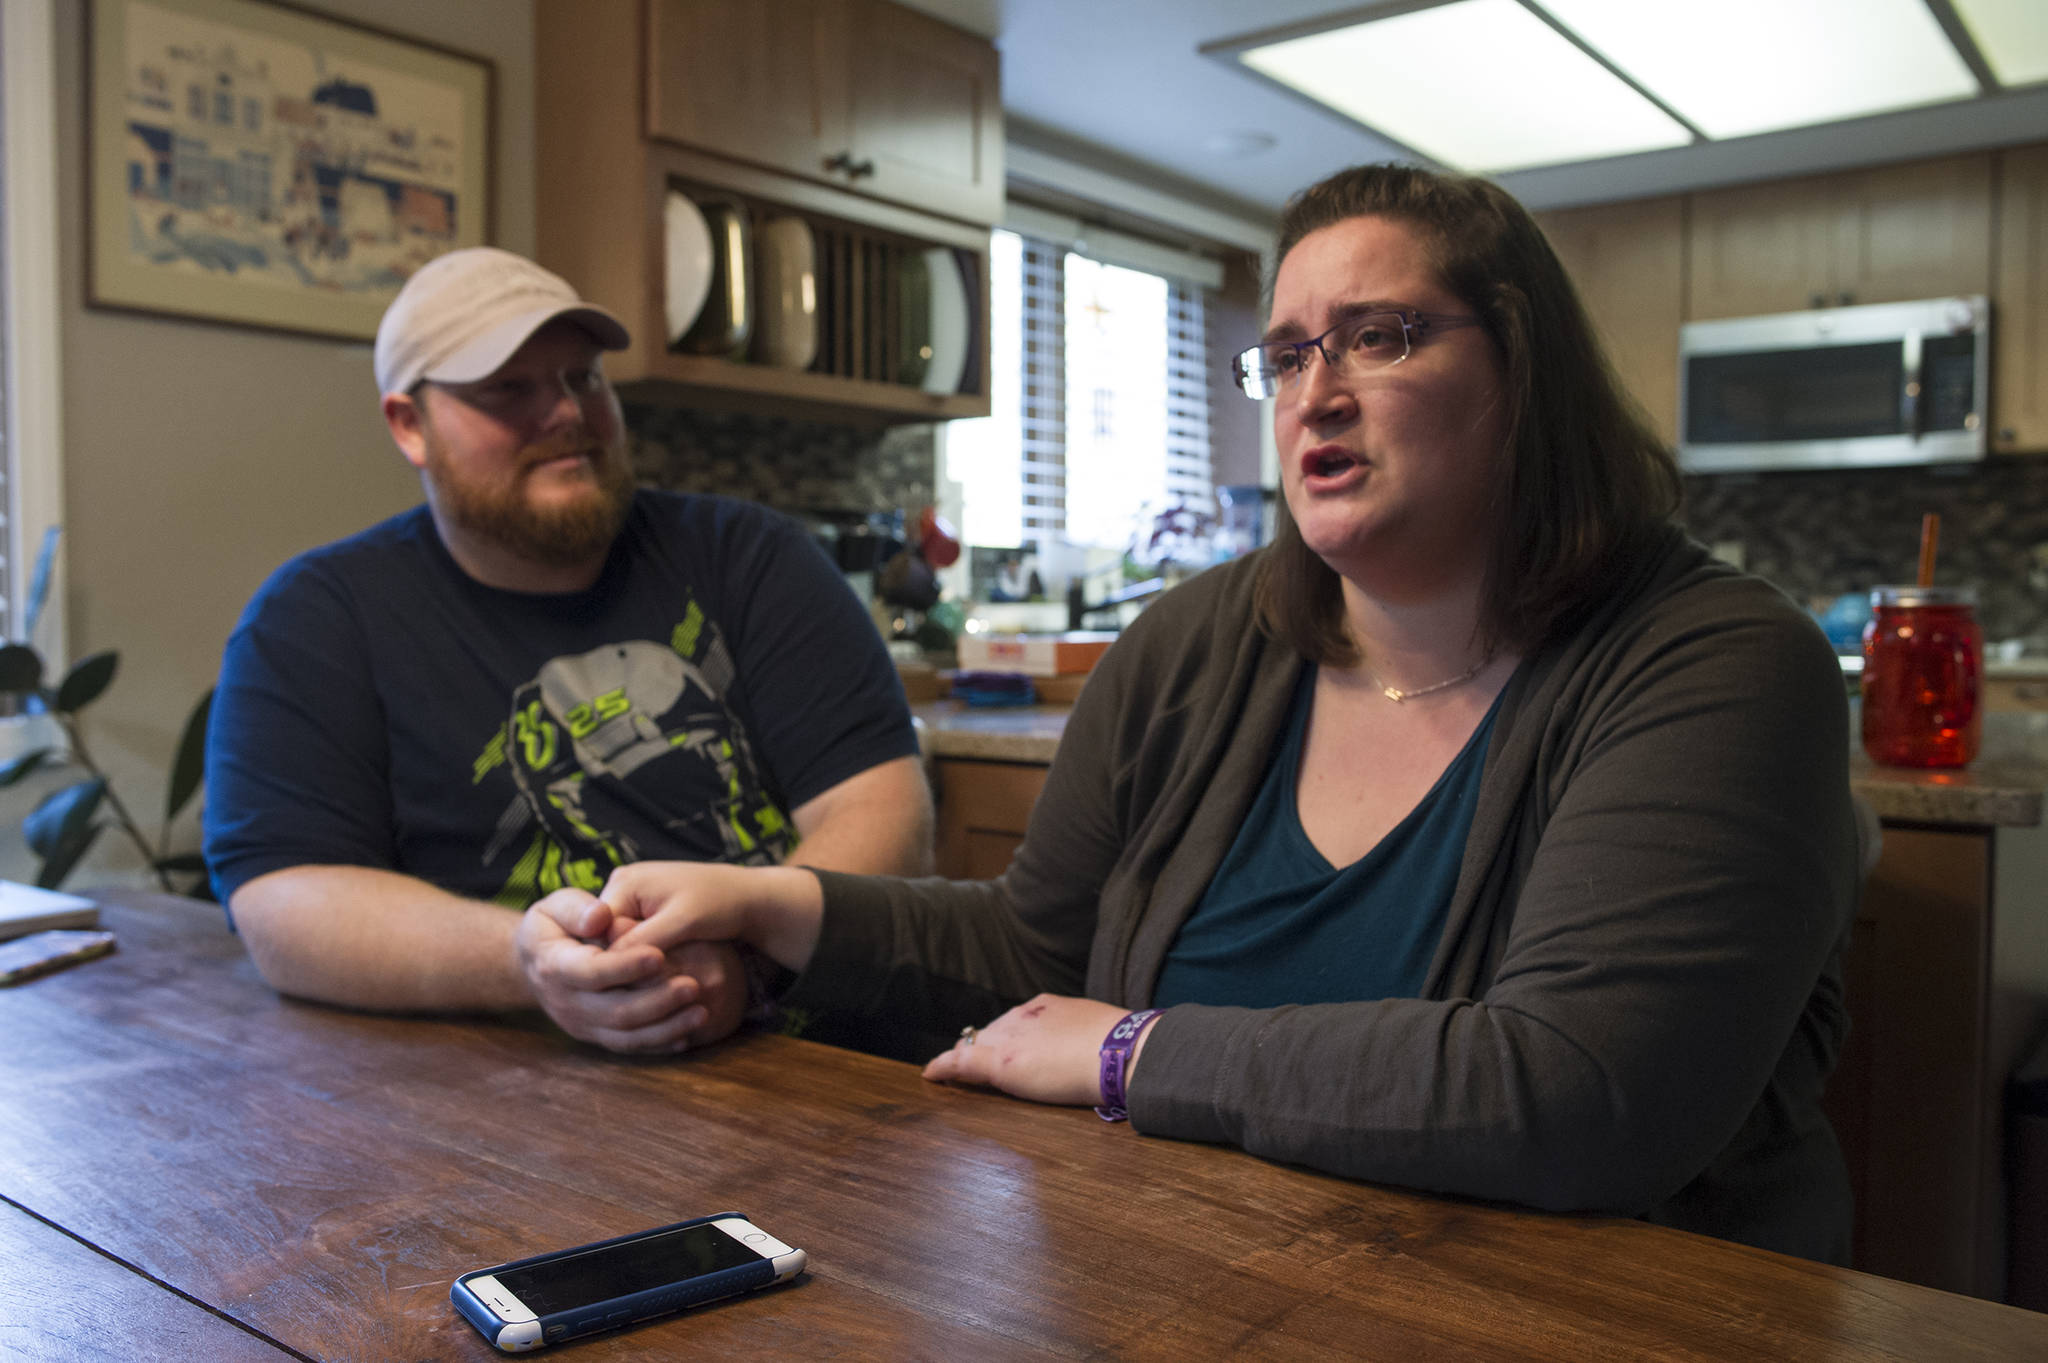 Juneau residents Hilary Rehfield-Green and her husband, Ryan Green, talk Wednesday, Oct. 4, 2017, about surviving the mass shooting at the Route 91 Harvest Music Festival in Las Vegas last weekend. (Michael Penn | Juneau Empire)